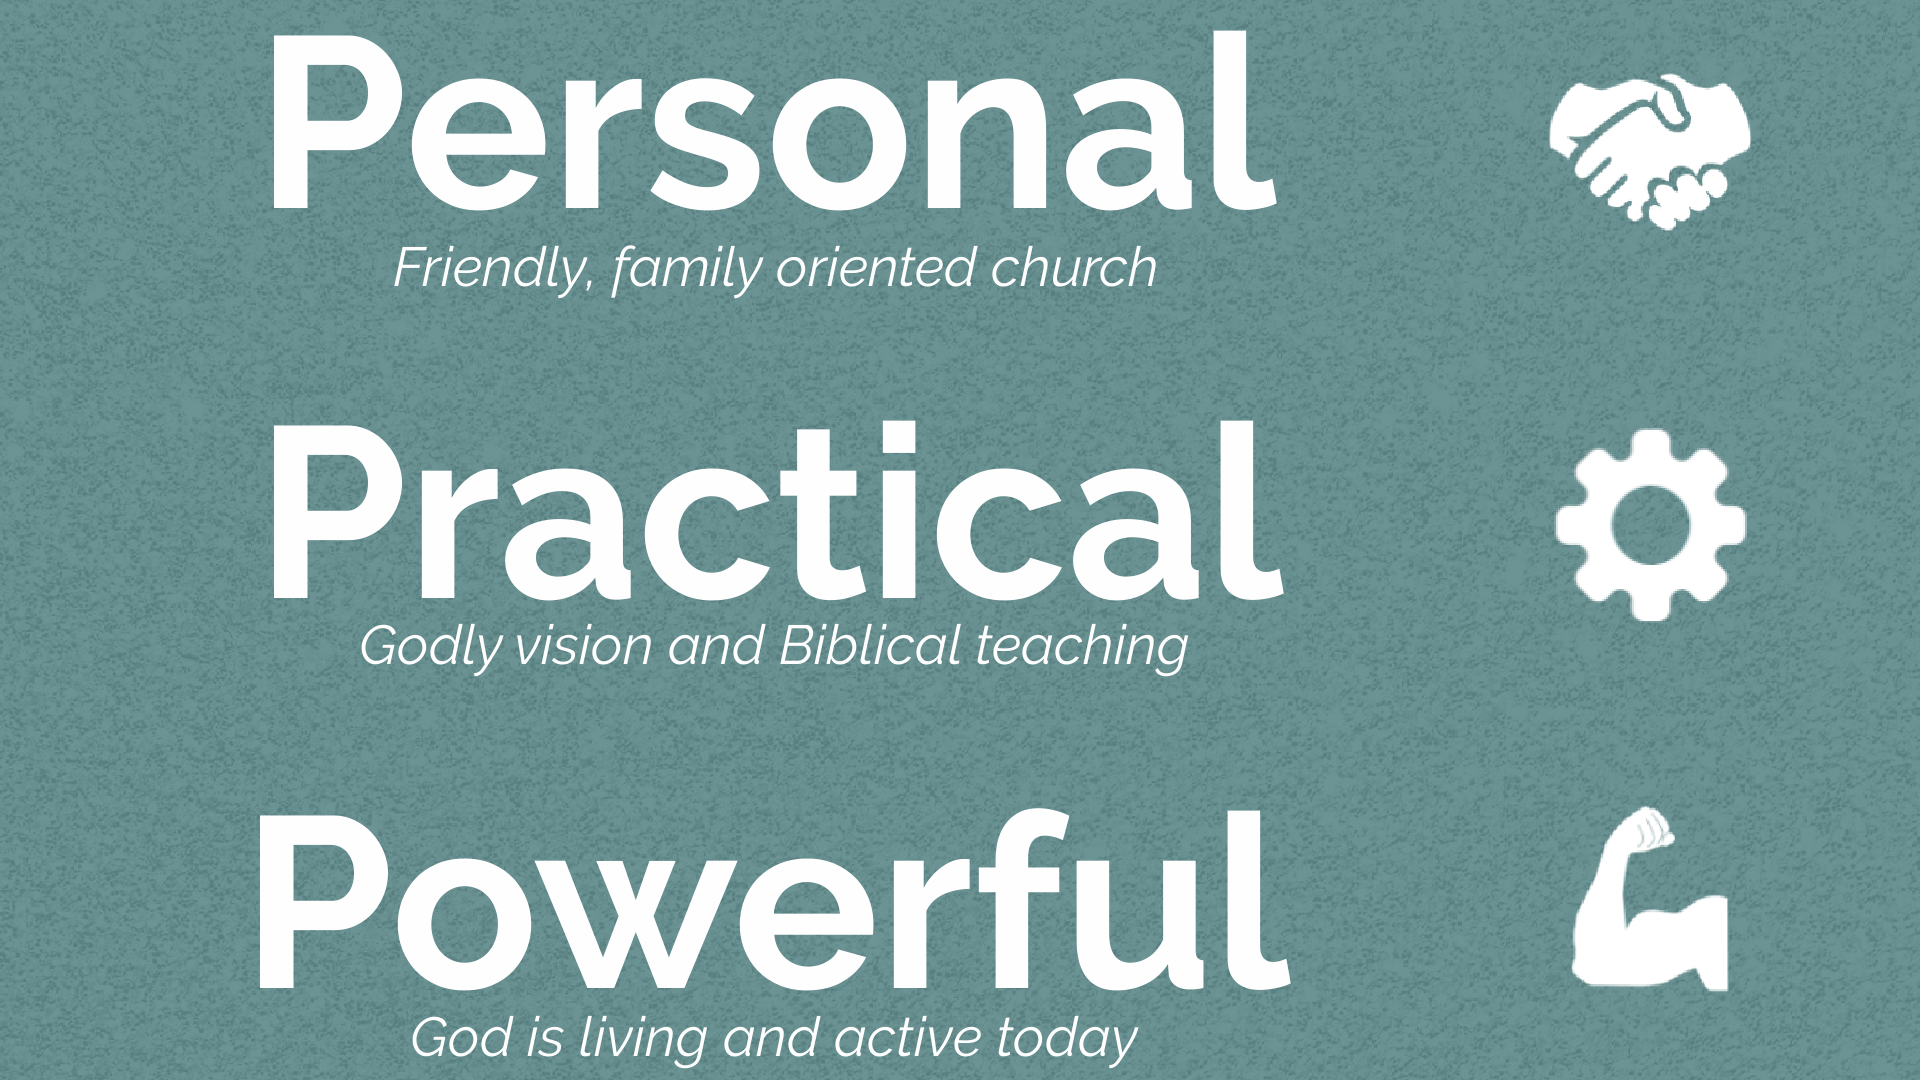 Personal (friendly, family oriented church), Practical (Godly vision and Biblical teaching), Powerful (God is living and active today)